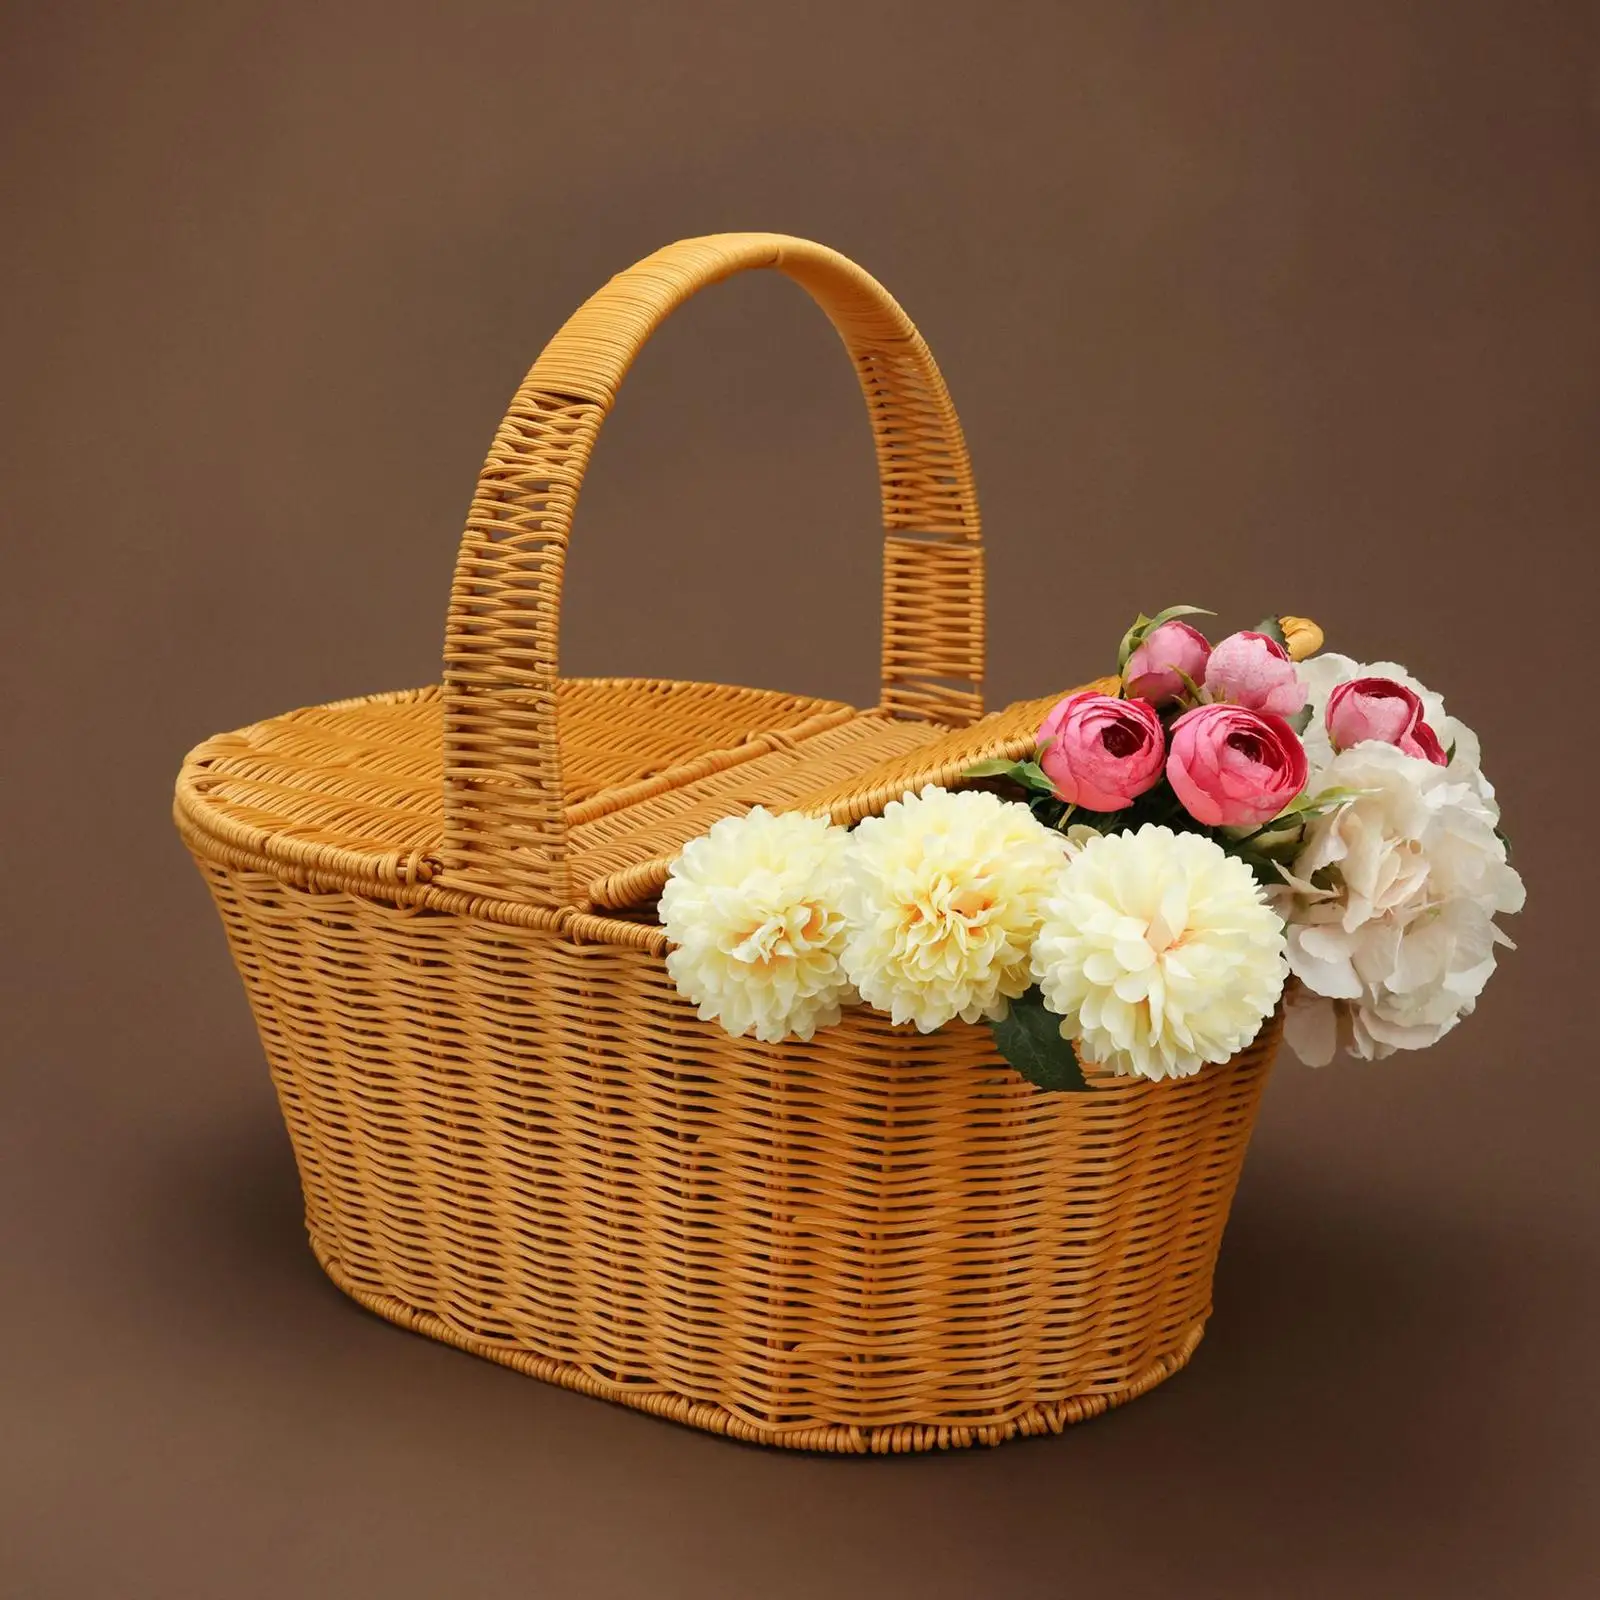 Woven Basket with Handles Large Capacity Decorative Snack Bread Basket for Picnic Kitchen Shopping Bathroom Cabinet